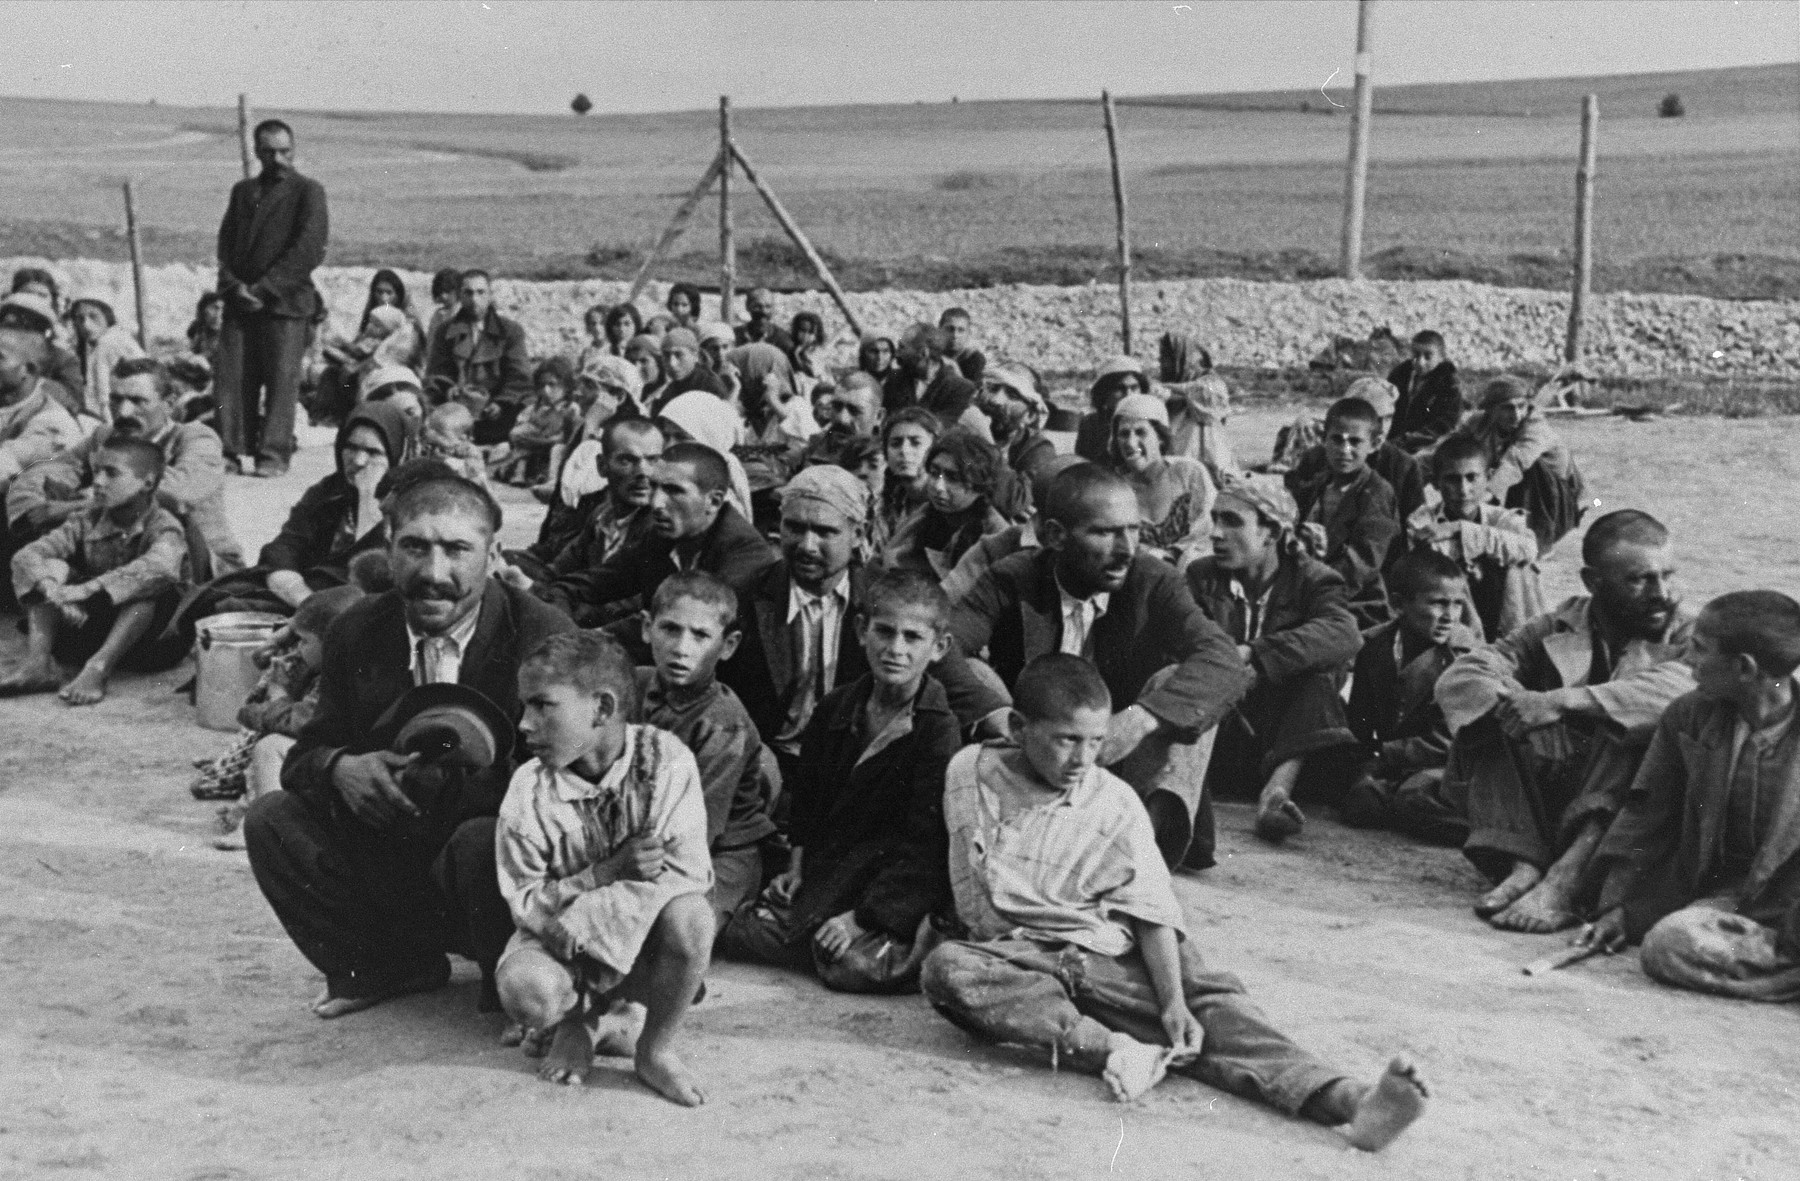 Romani prisoners at Belzec concentration camp in Poland, 1940.